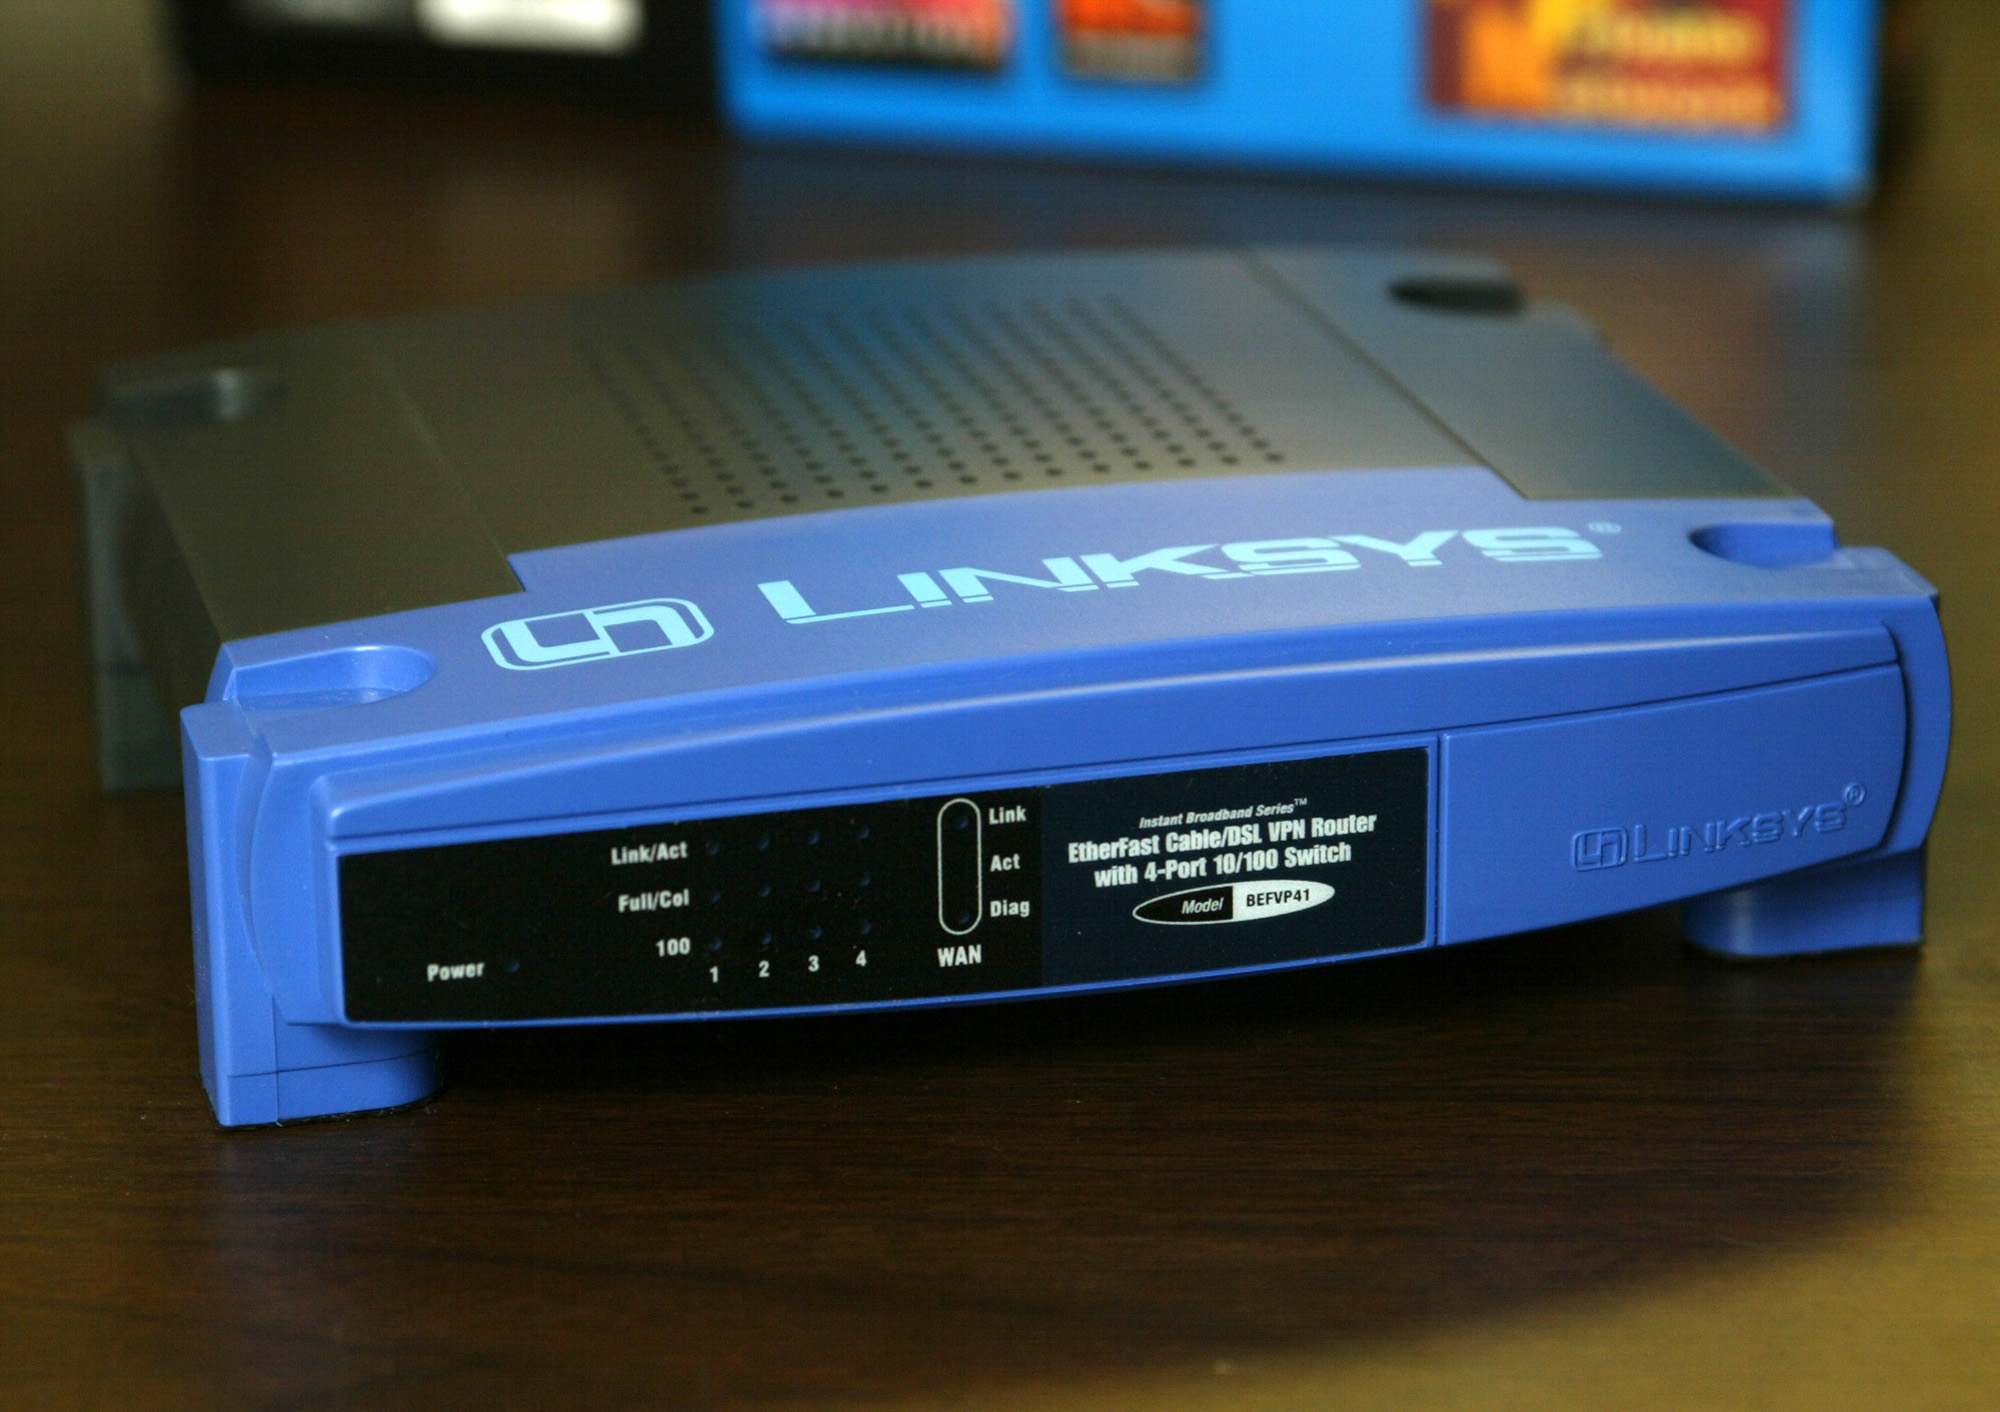 Column: Can I remotely reboot my router?